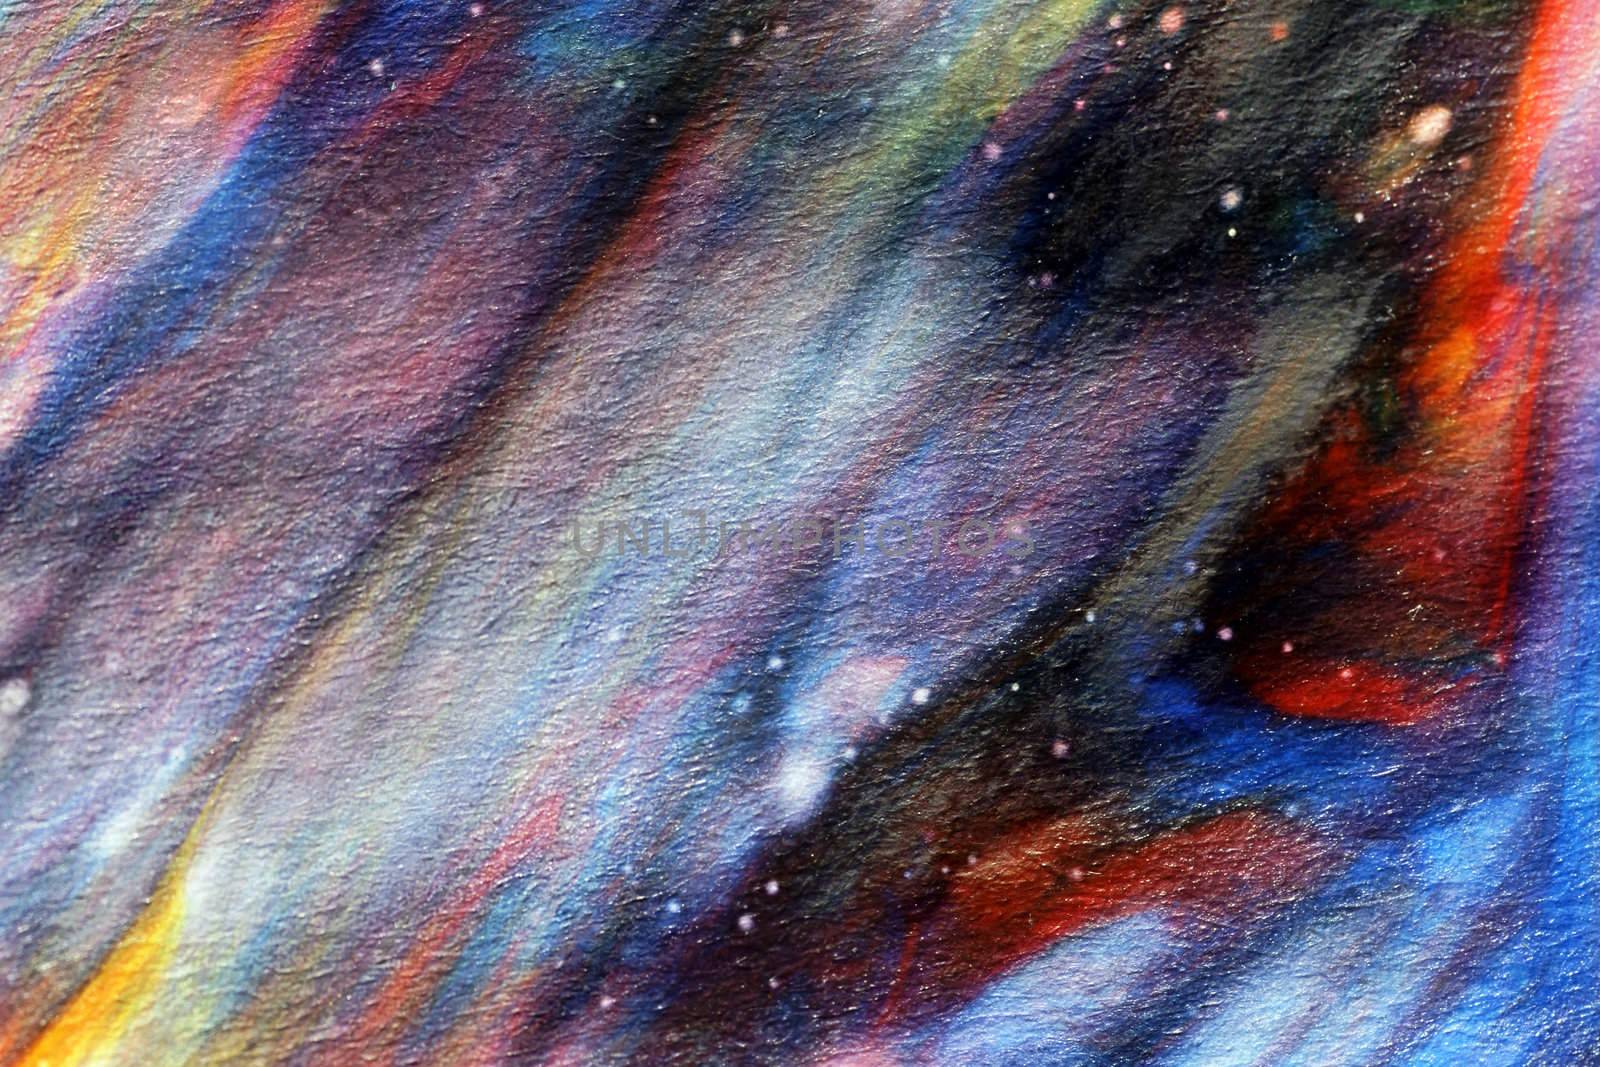 Original space inspired abstract watercolor painting with deep and rich colors and great paper fiber details as texture.